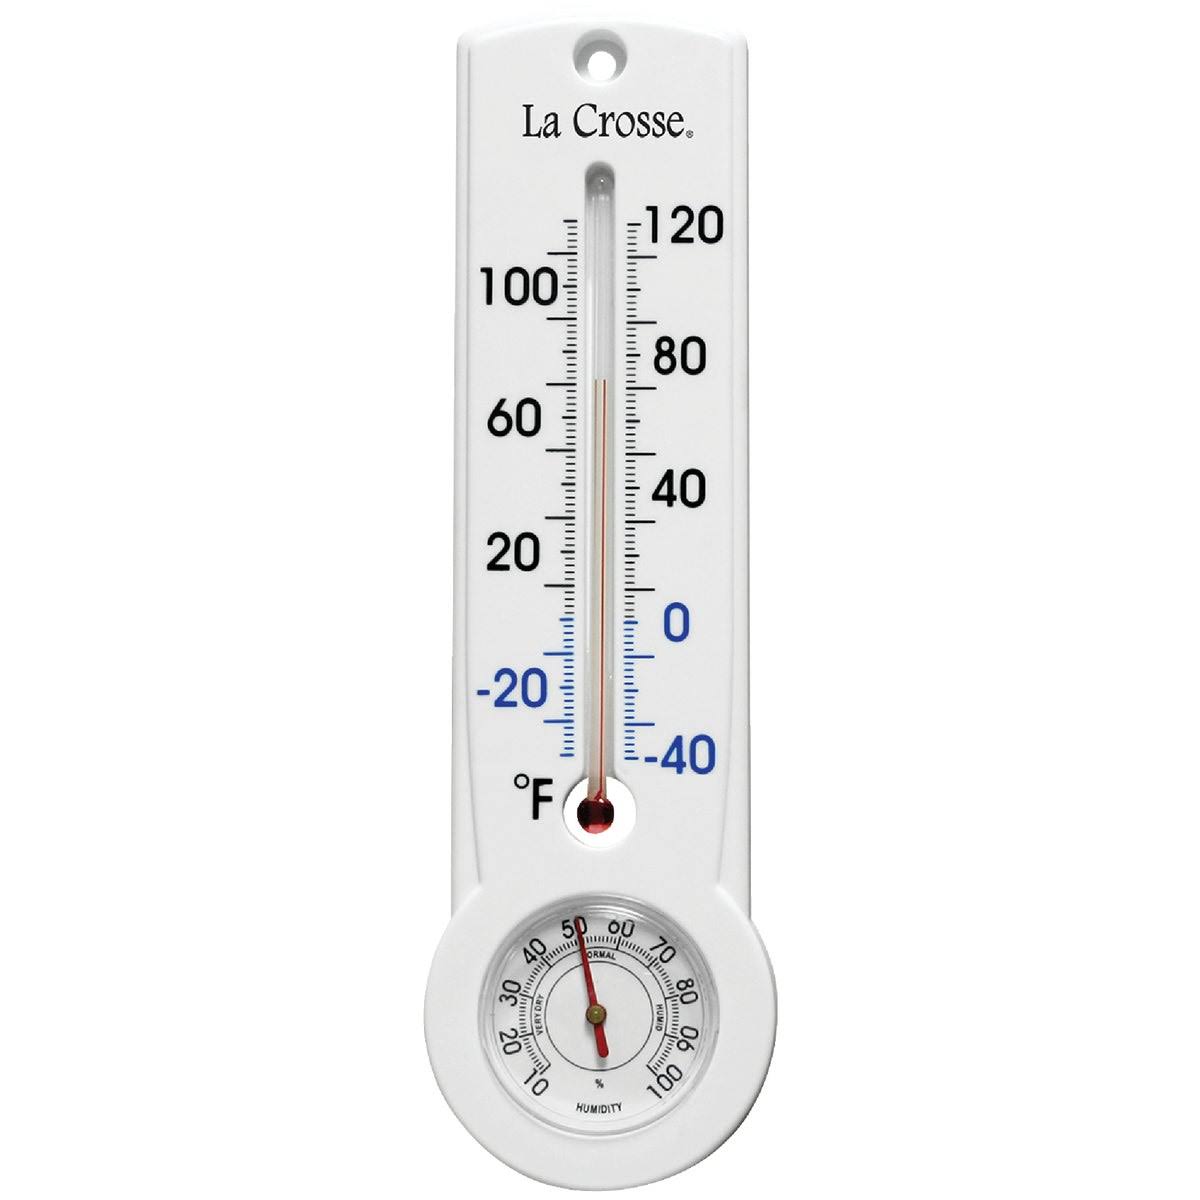 Lacrosse Technology Thermometer Hygrometer - 8.75"